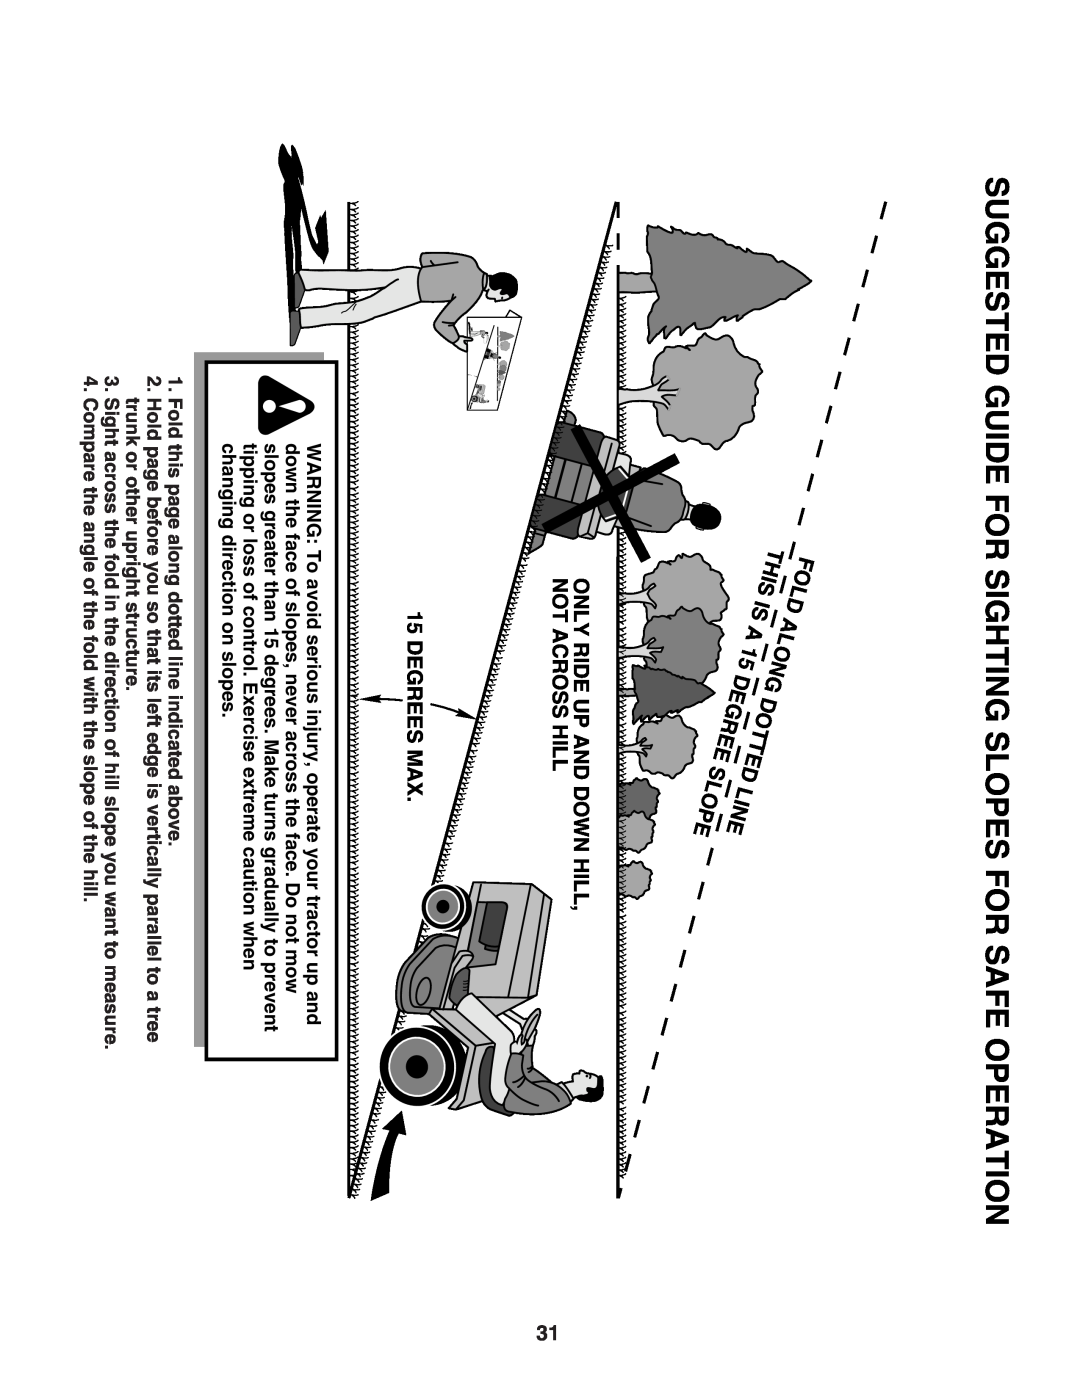 Poulan 405035 manual Suggested Guide For Sighting Slopes For Safe Operation 